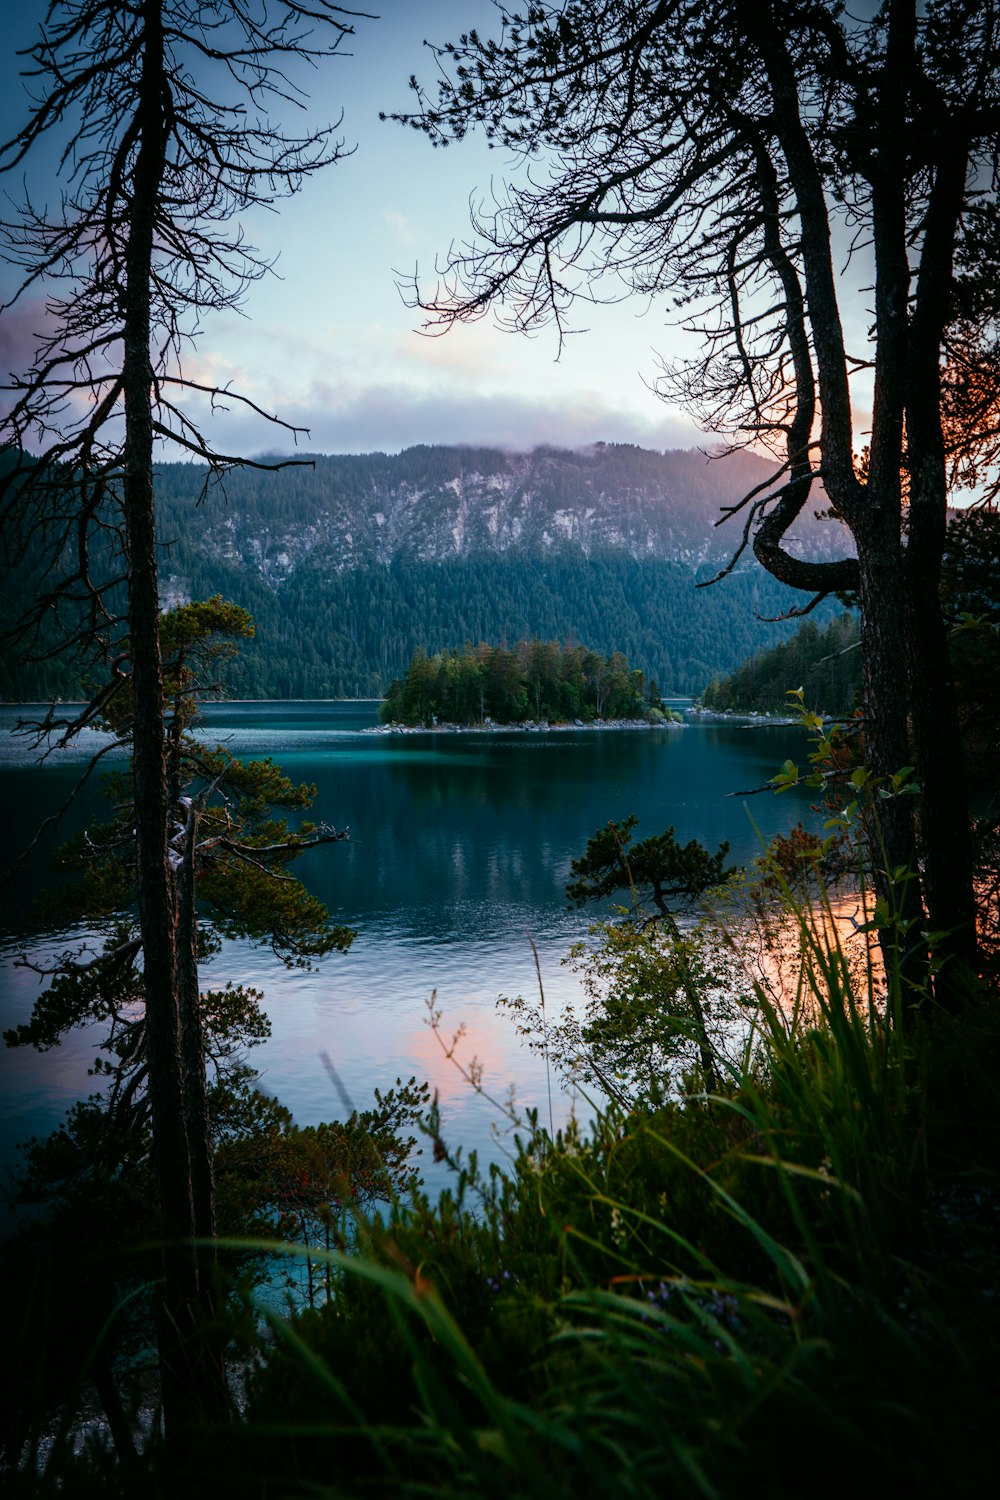 lake surrounded by trees and mountains during daytime